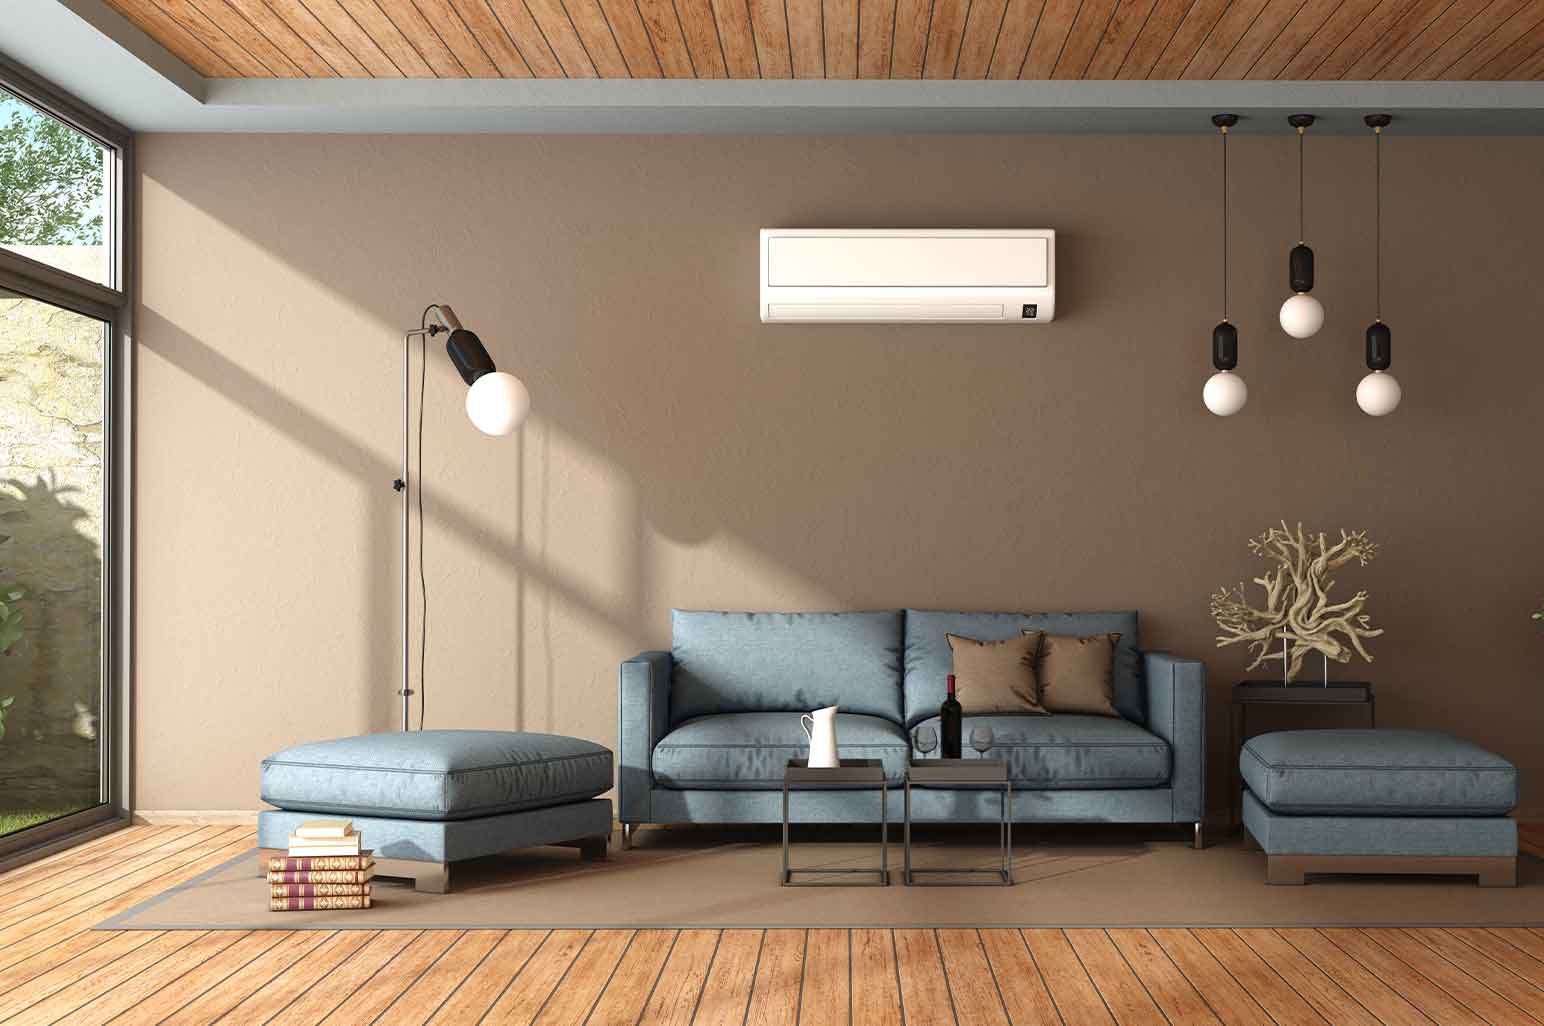 Looking For Ways To Keep Your Home Cool? Here Are 5 Top Tips